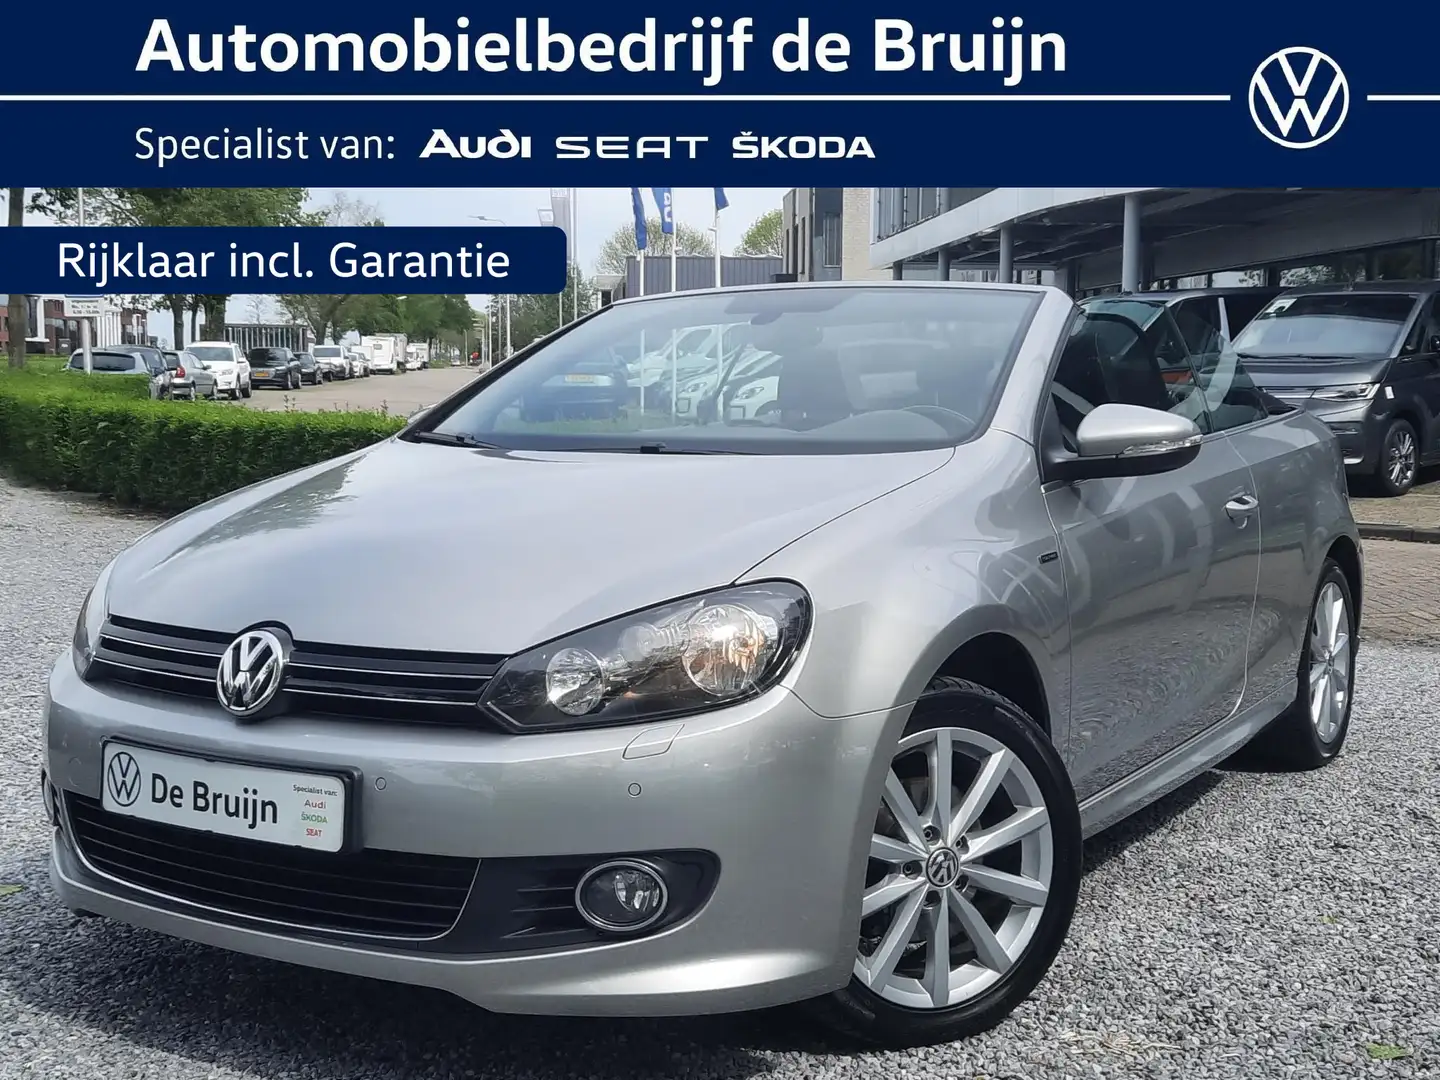 Volkswagen Golf Cabriolet 1.2 TSI 105pk Lounge (Navi,Clima,LM,Pdc,LM) Zilver - 1